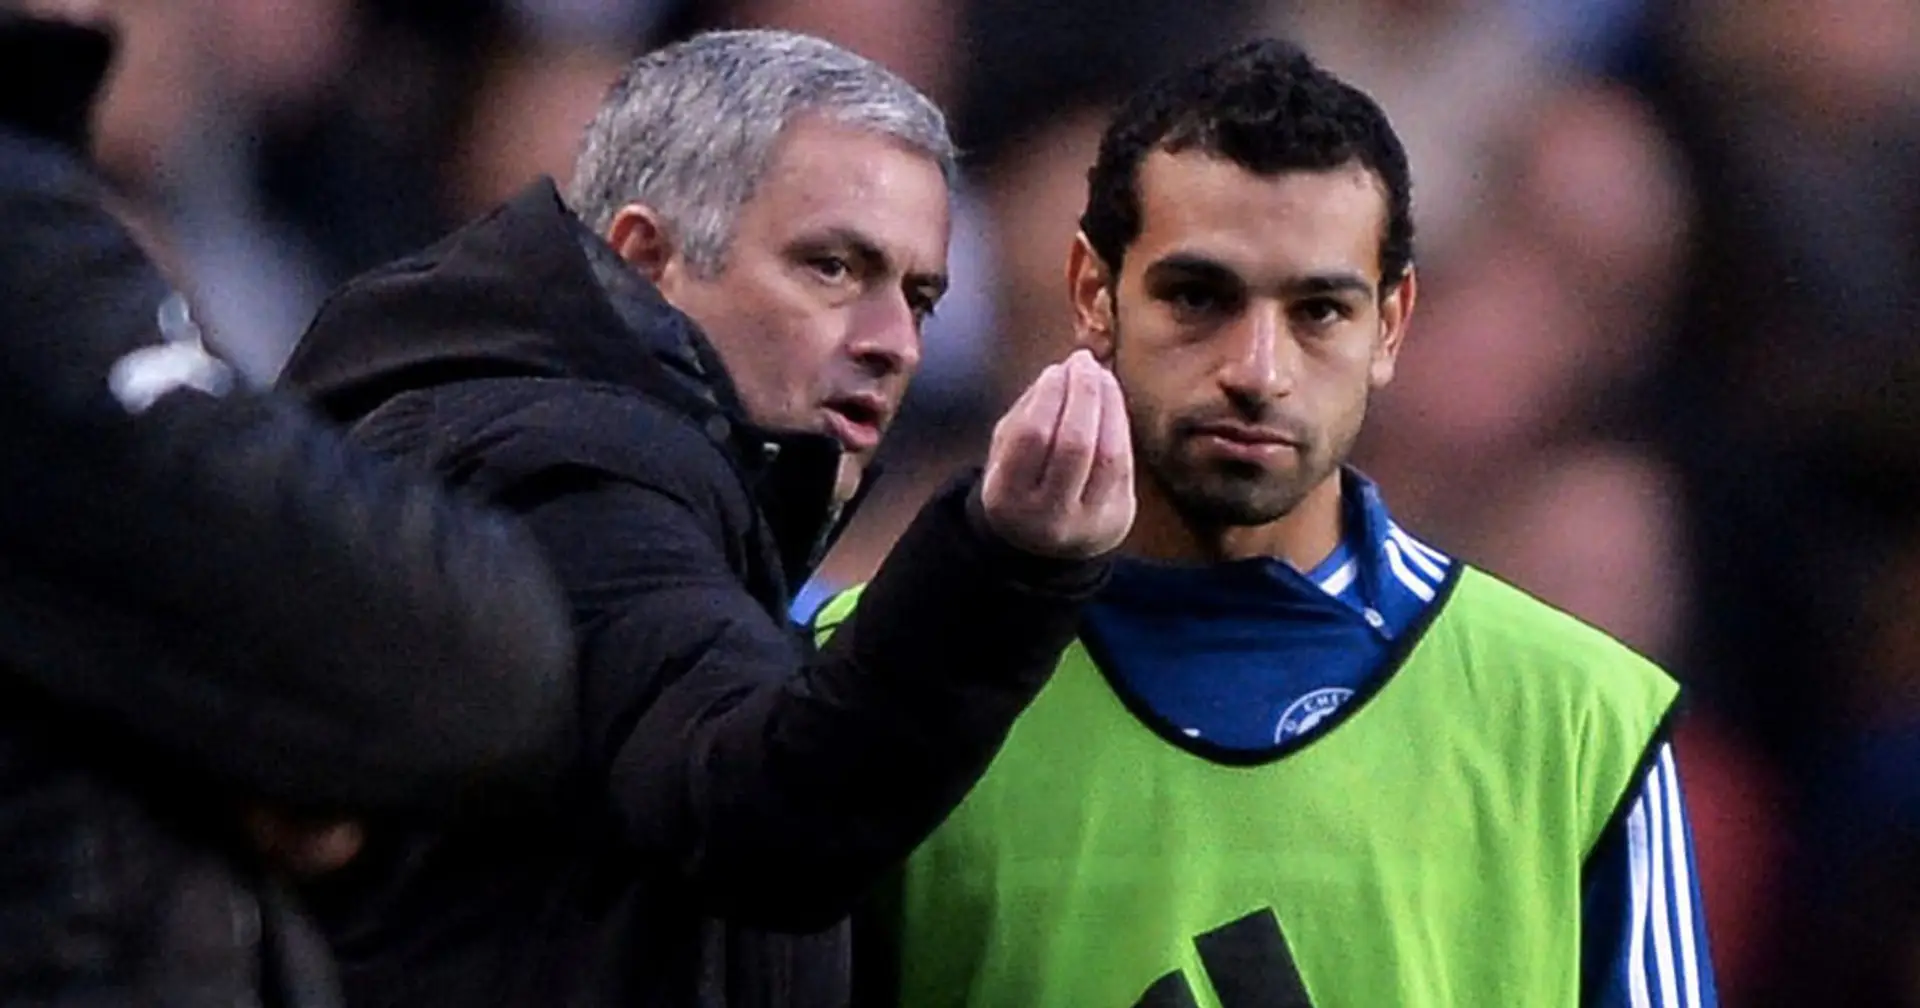 'He destroyed the kid': Obi Mikel reveals how Mourinho made Salah cry